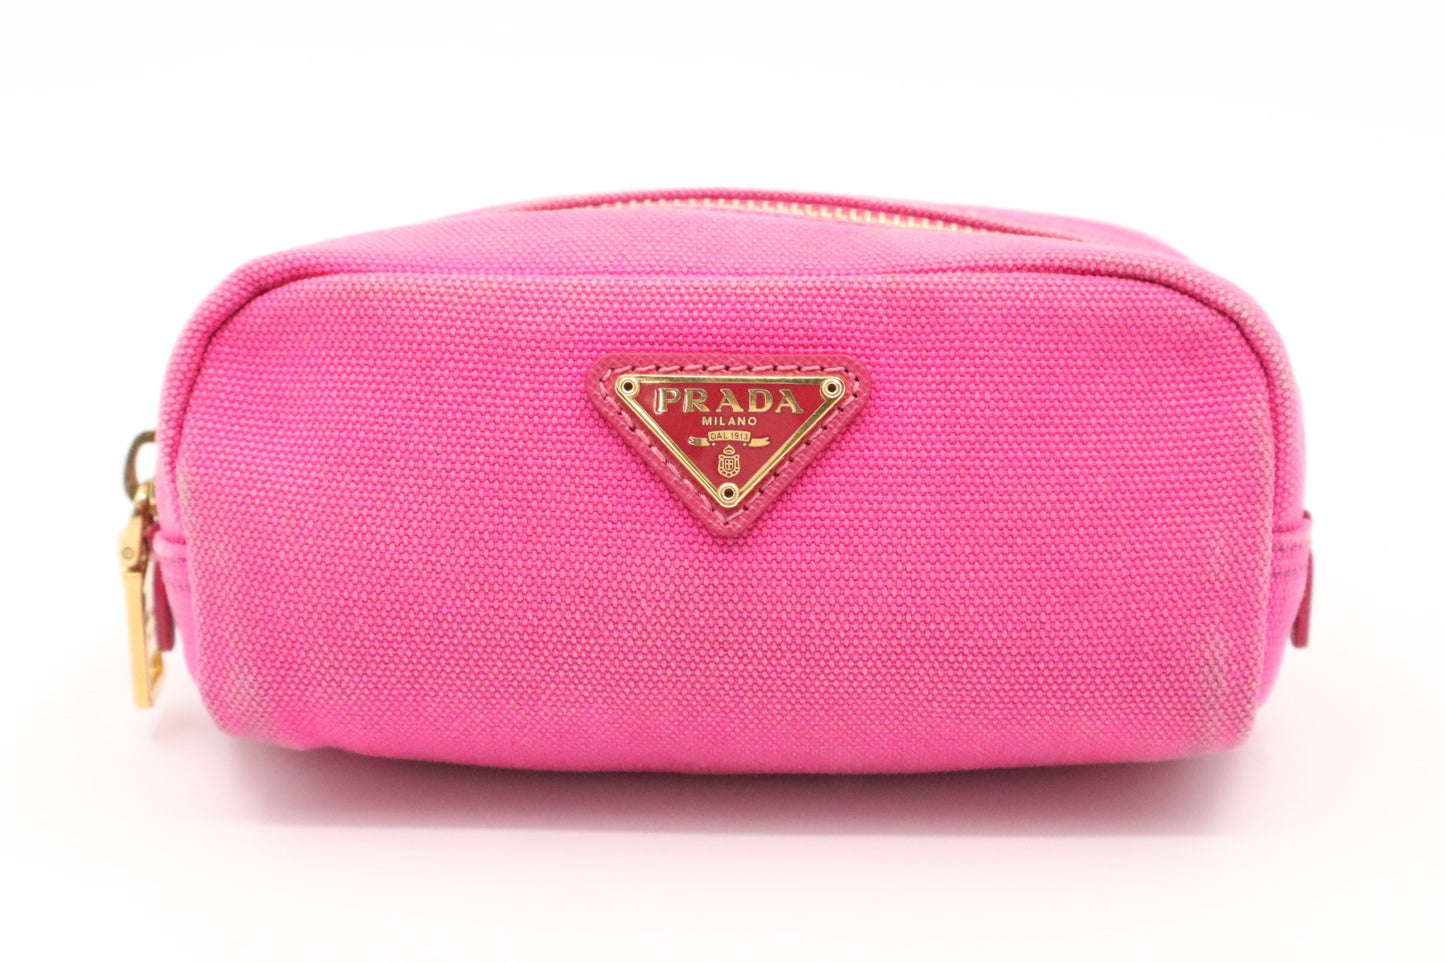 Prada Cosmetics Pouch in Pink Canvas